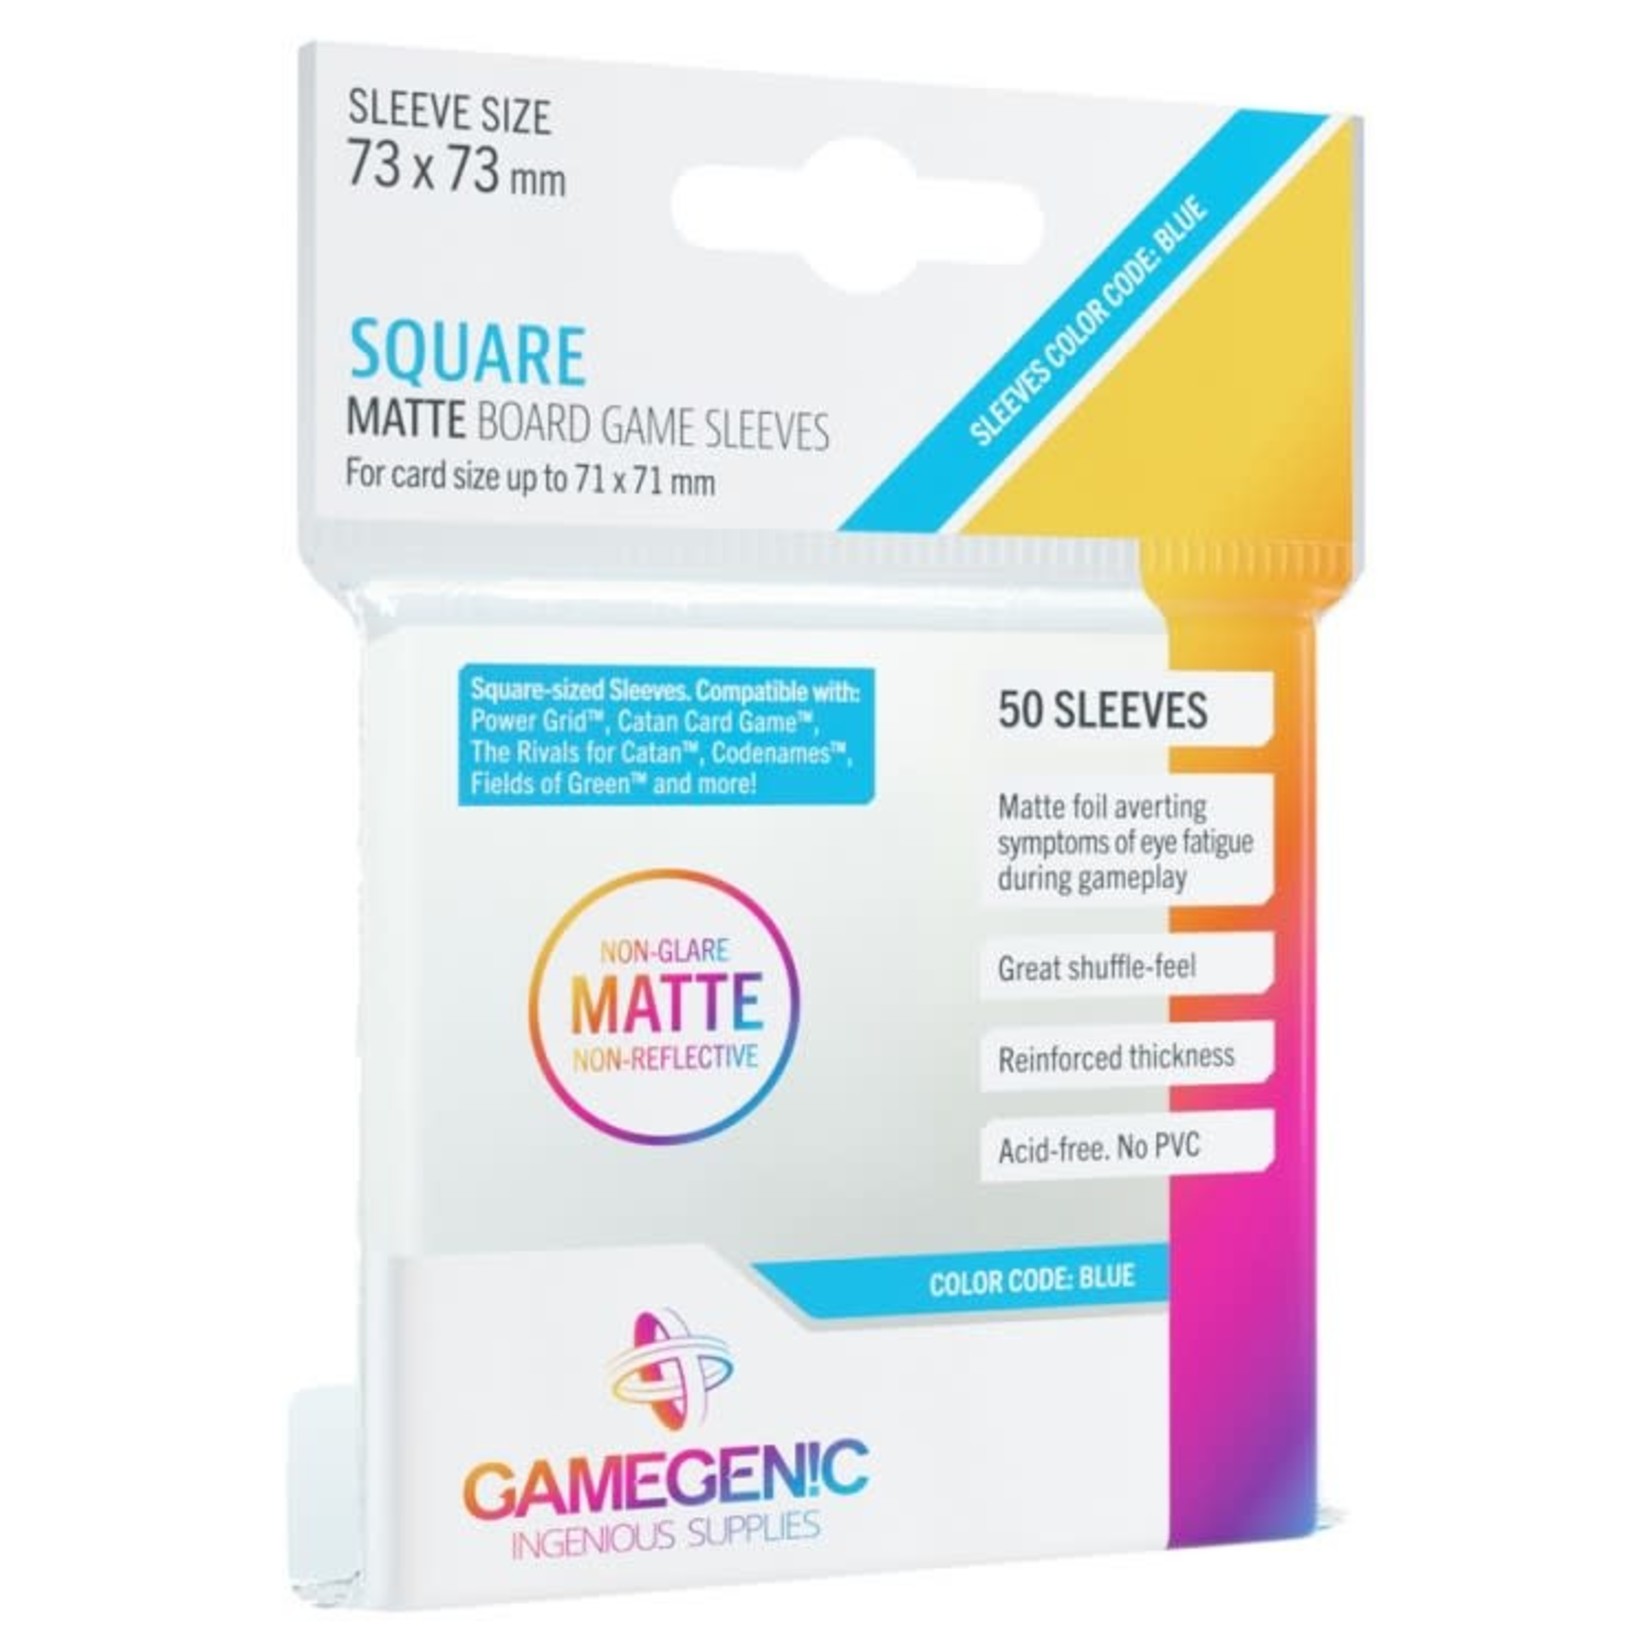 Gamegenic Gamegenic Sleeves: Square MATTE - 50 count (73x73mm)